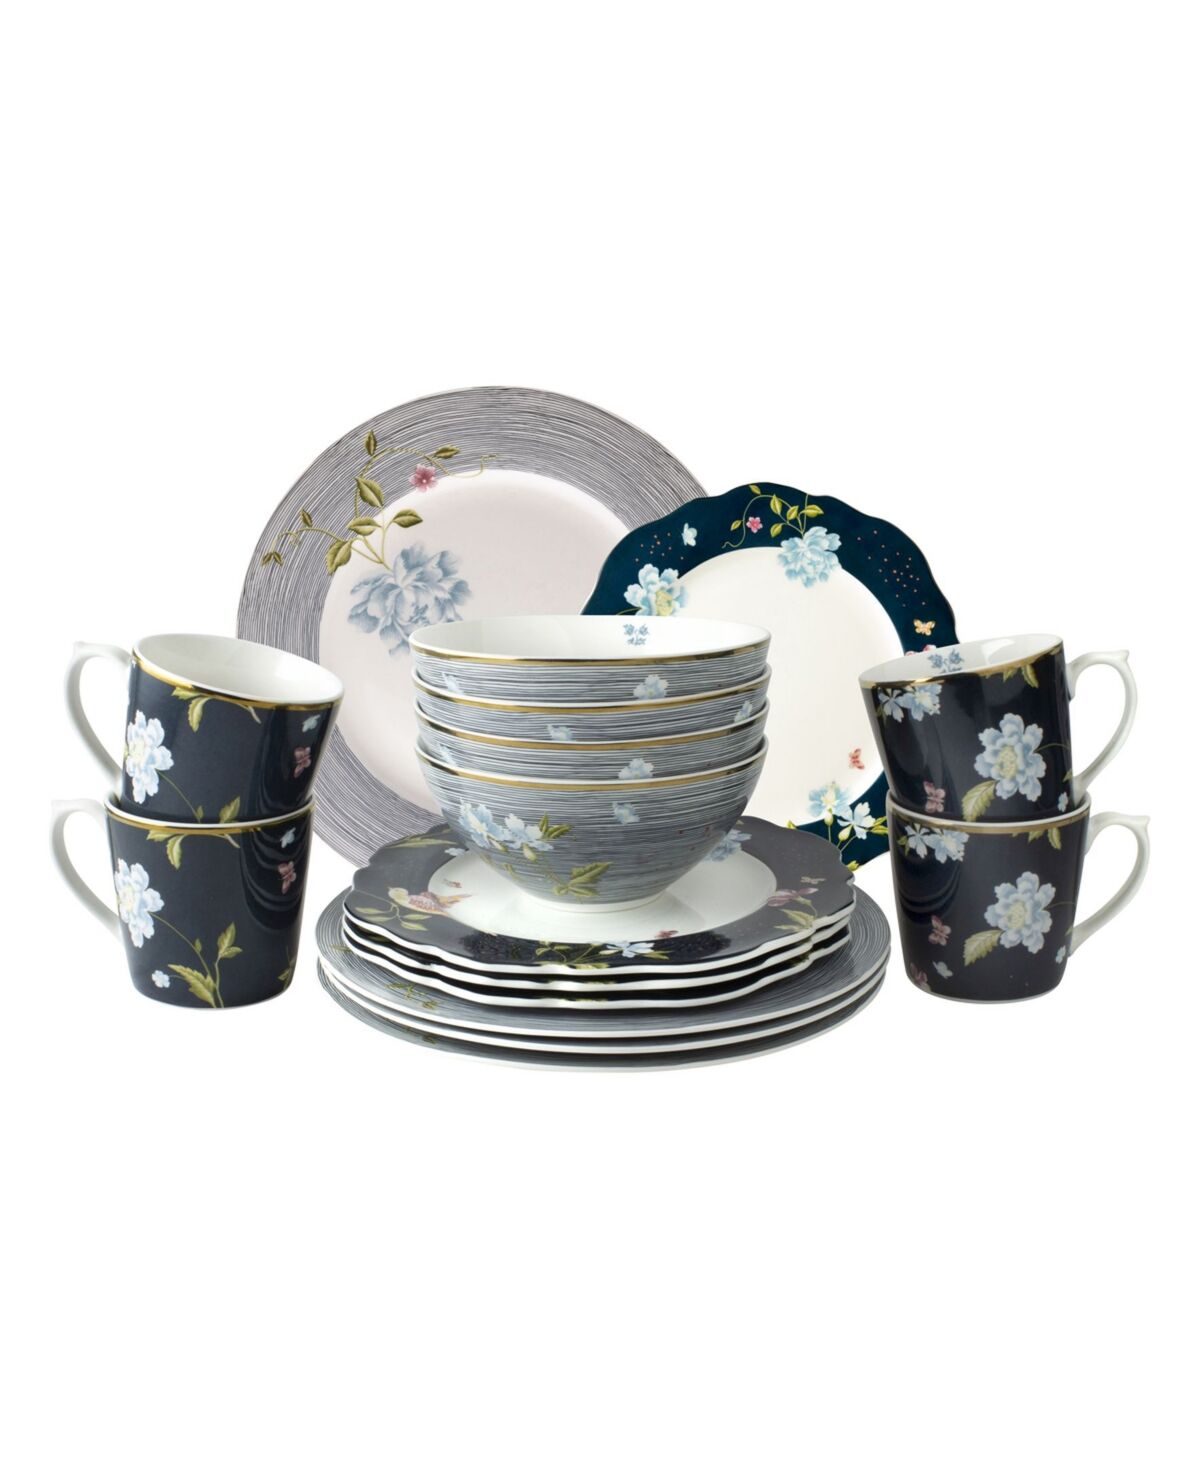 Laura Ashley Heritage Collectables Dinner Set in Gift Box, 16 Pieces - White with Blue and Dark Blue